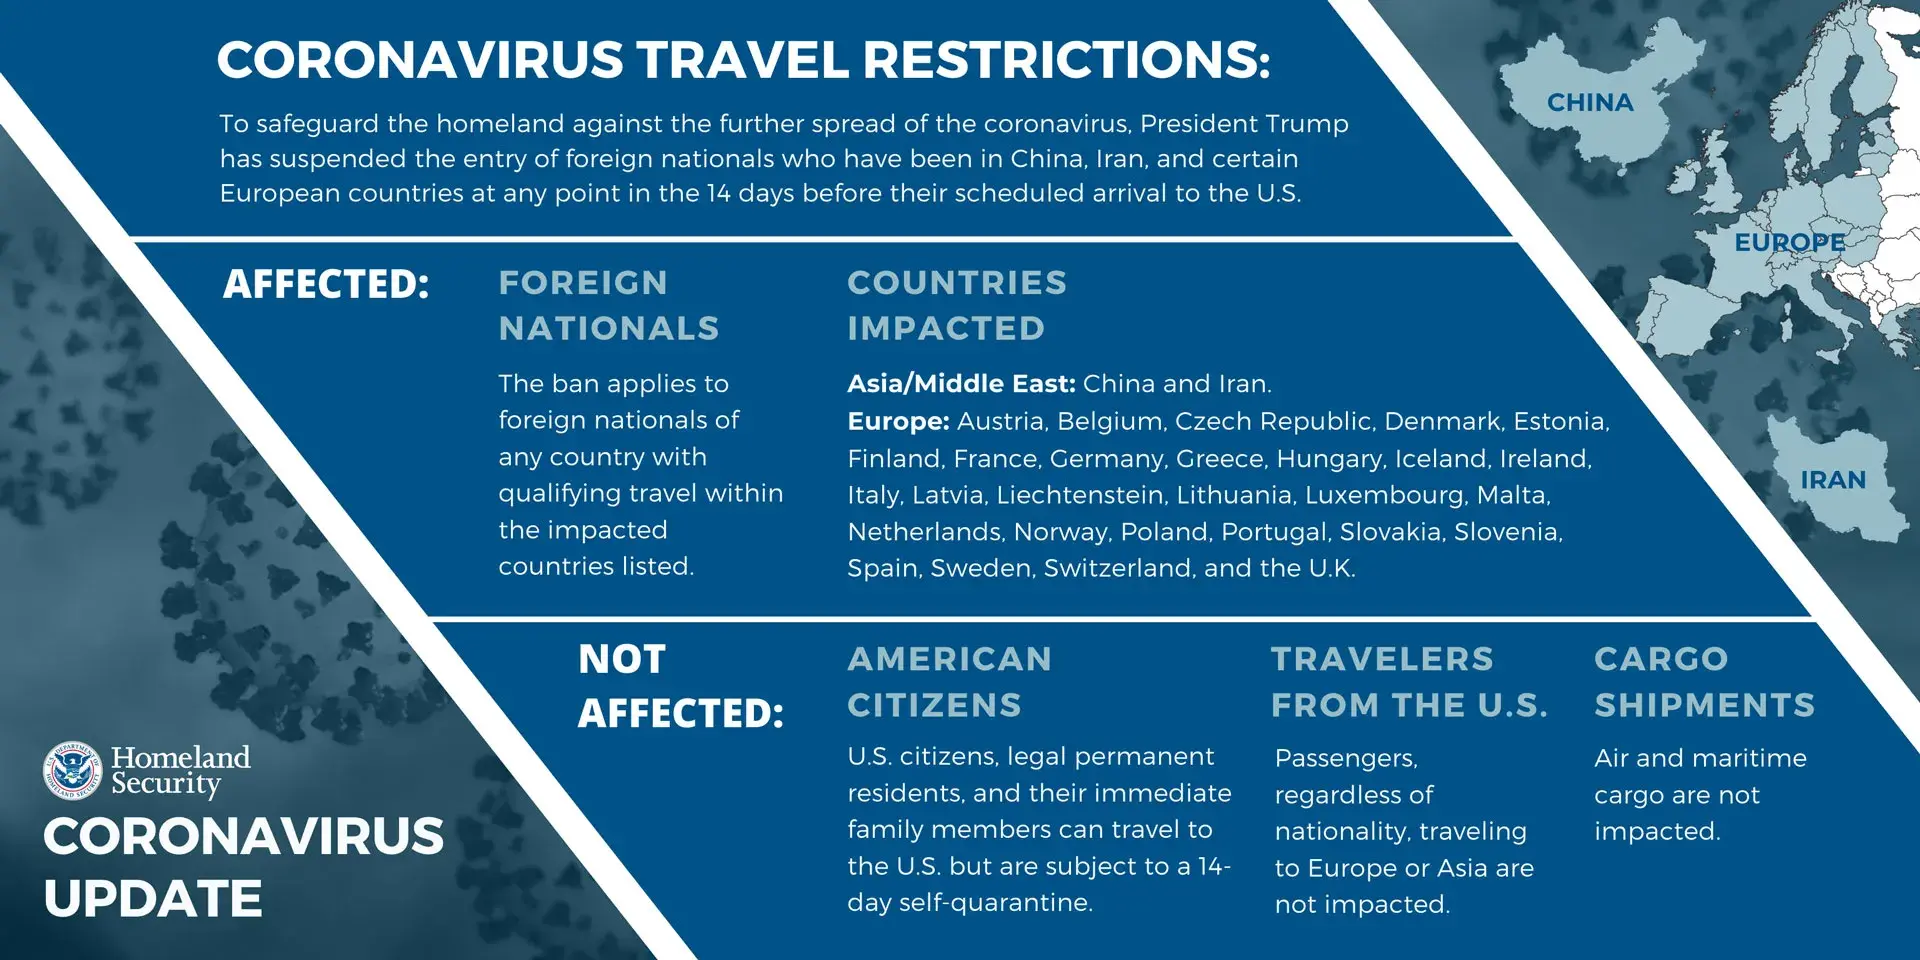 Coronavirus Travel Restrictions: To safeguard the homeland against the further spread of the coronavirus, President Trump has suspended the entry of foreign nationals who have been in China, Iran, and certain European countries at any point in the 14 days before their scheduled arrival to the US. | Affected: Foreign Nationals.  The ban applies to foreign nationals of any country with qualifying travel within the impacted countries listed. | Countries impacted: Asia/Middle East: China and Iran. Europe: Austria, Belgium, Czech Republic, Denmark, Estonia, Finland, France, Germany, Greece, Hungary, Iceland, Ireland, Italy, Latvia, Liechtenstein, Lithuania, Luxembourg, Malta, Netherlands, Norway, Poland, Portugal, Slovakia, Slovenia, Spain, Sweden, Switzerland, and the U.K. | Not affected: American Citizens: U.S. citizens, legal permanent residents, and their immediate family members can travel to the US but are subject to a 14-day self-quarantine; Travelers from the US: Passengers, regardless of nationality, traveling to Europe or Asia are not impacted; Cargo Shipments: Air and maritime cargo are not impacted.